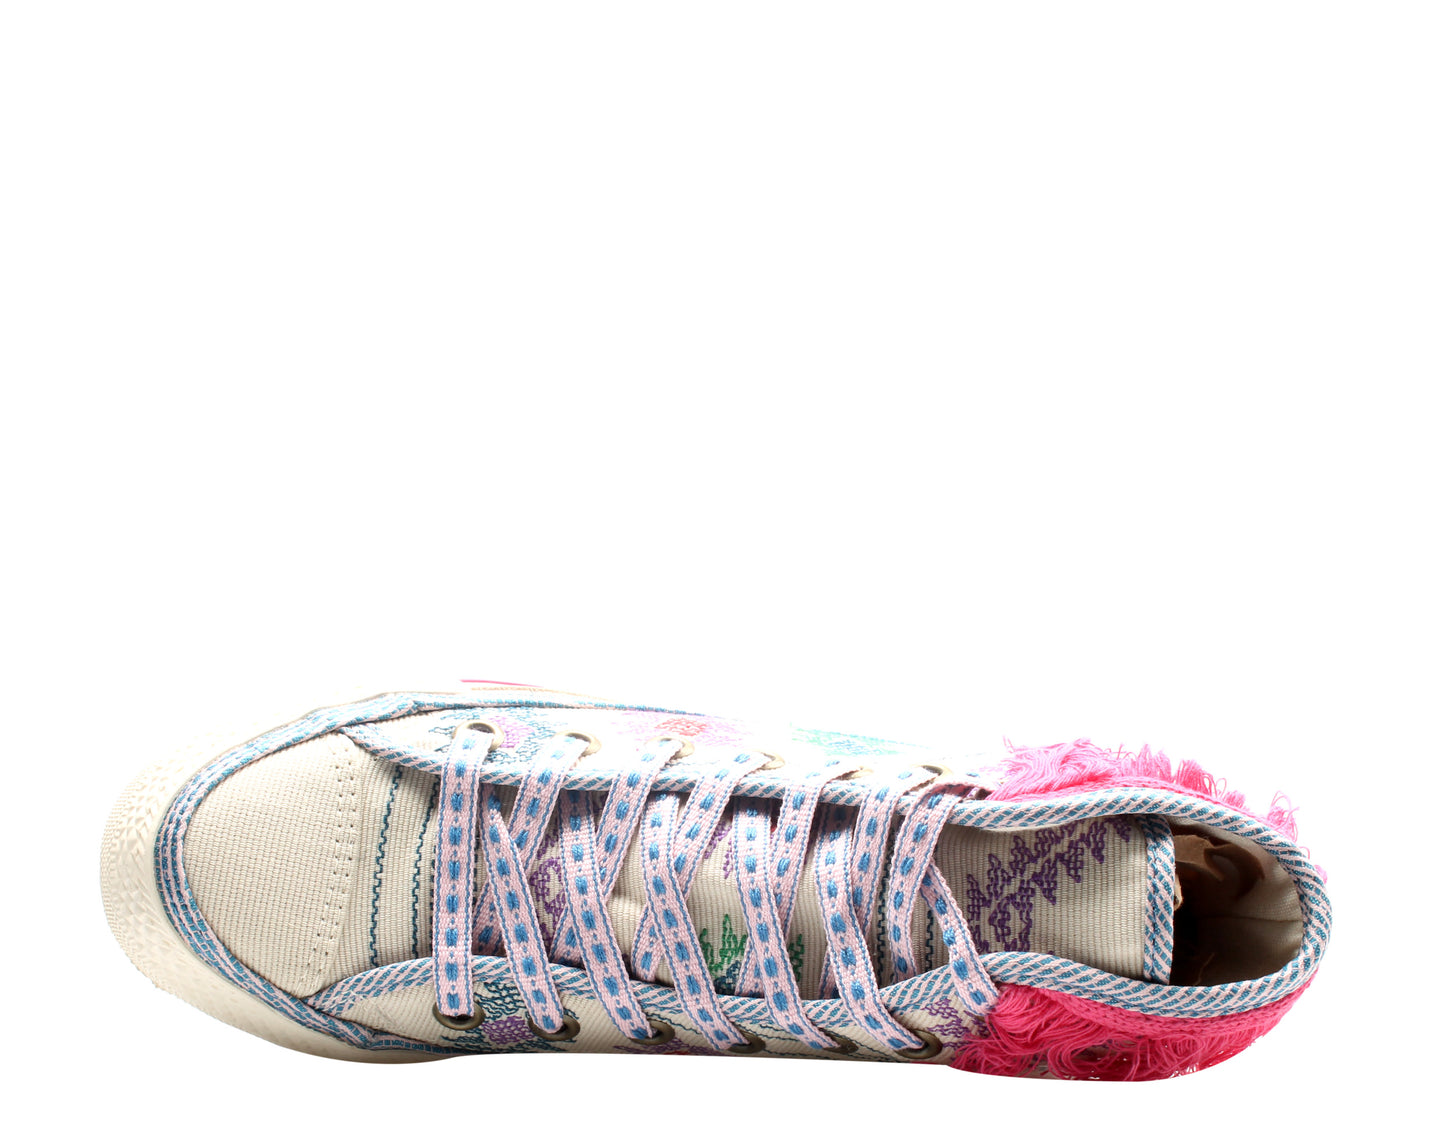 Converse Chuck Taylor All Star Pinotepa Parchment/Multi High Top Sneakers 1Y753